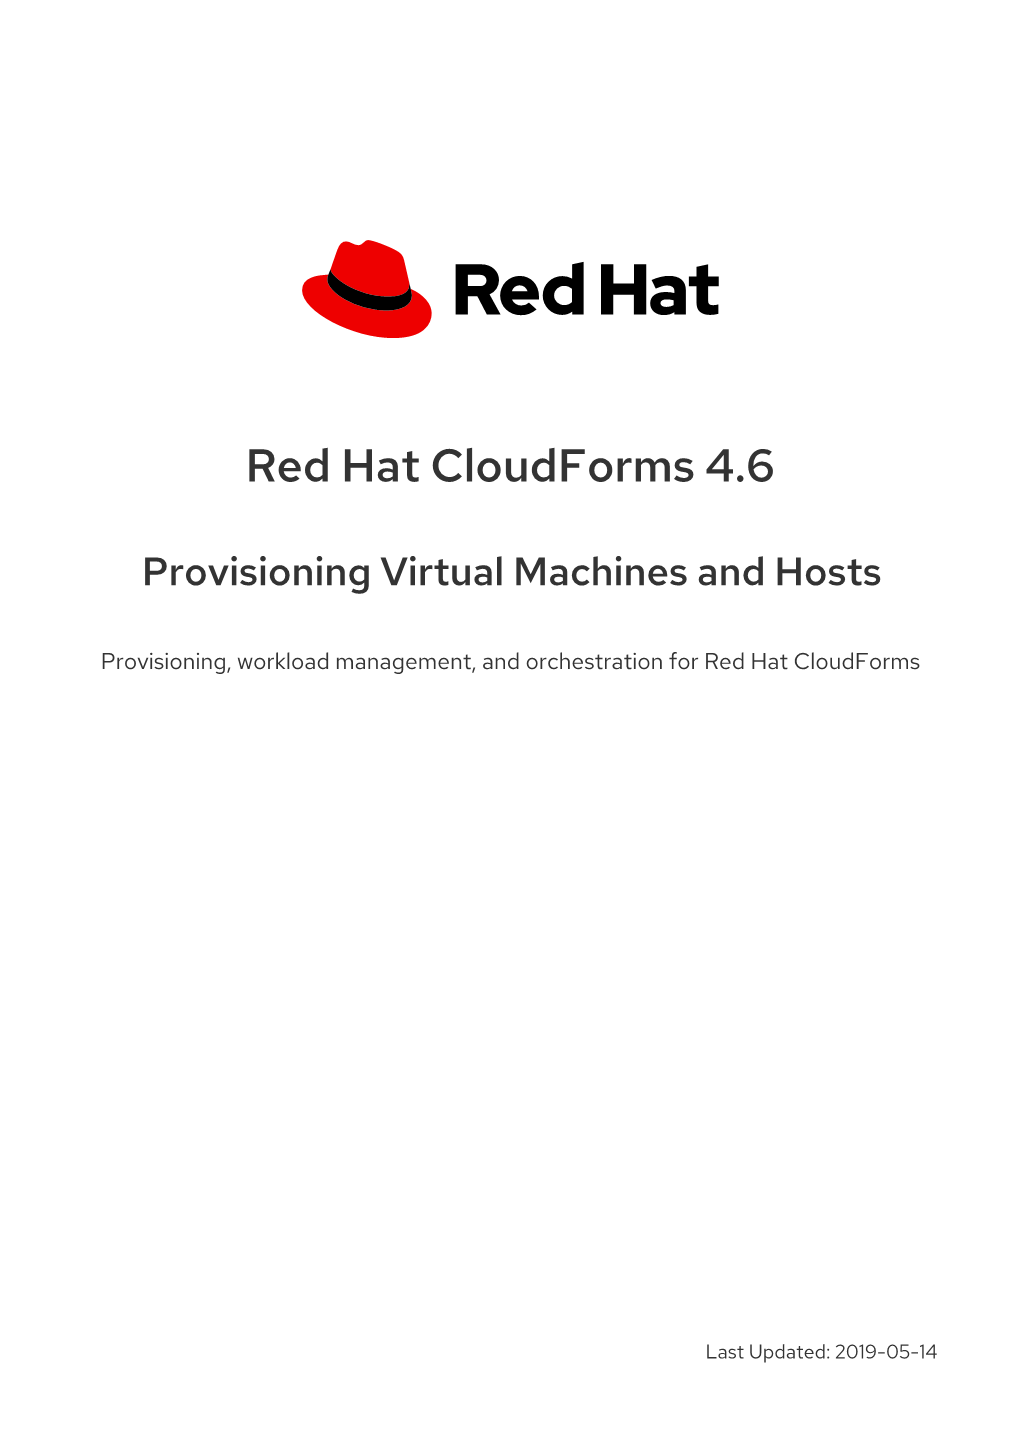 Red Hat Cloudforms 4.6 Provisioning Virtual Machines and Hosts